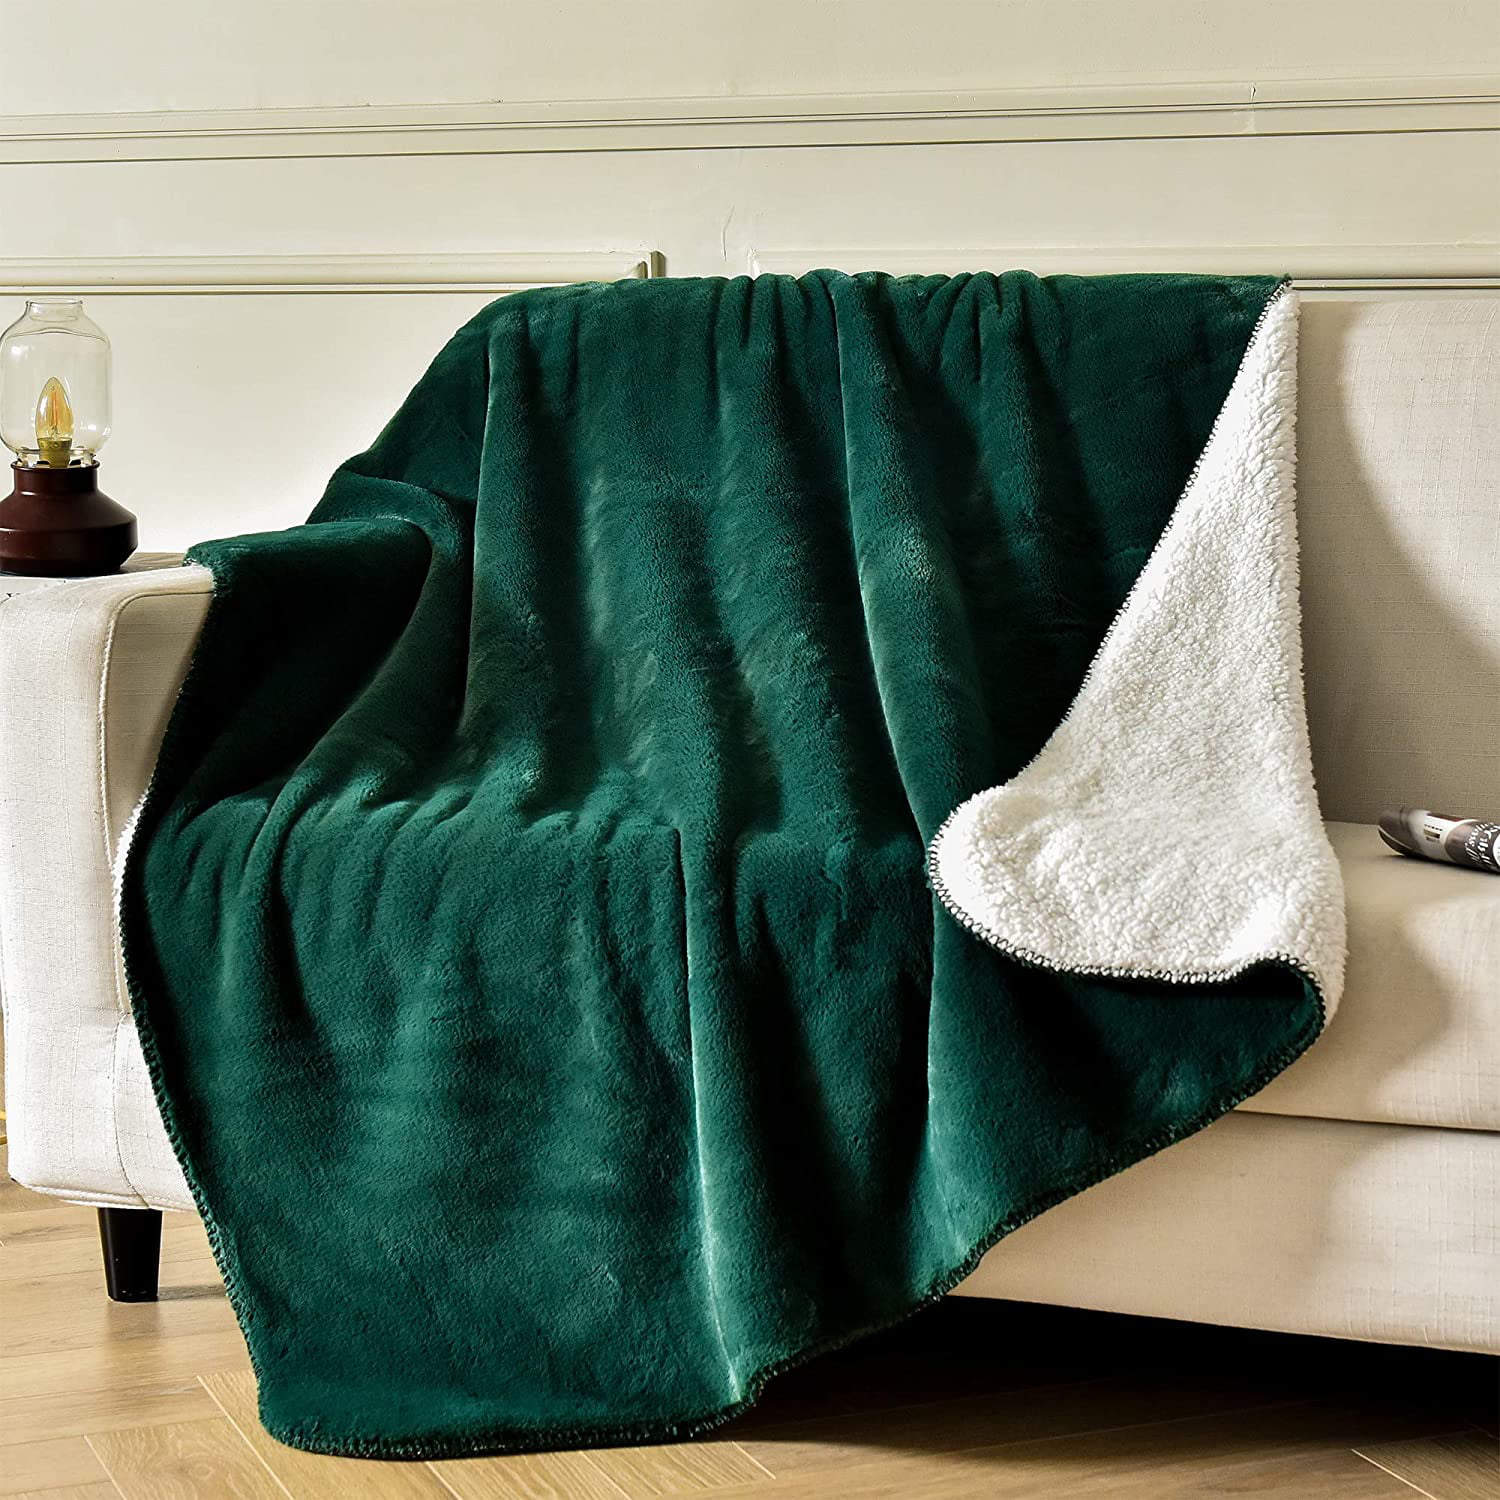 Green Super Soft Double Sided Blankets,Lambs Wool Throw Blanket Lightweight Blanket Suitable for Sofa Bed Travel 60 X 50 inch Comfort Luxury Faux Fur Throw Blanket 